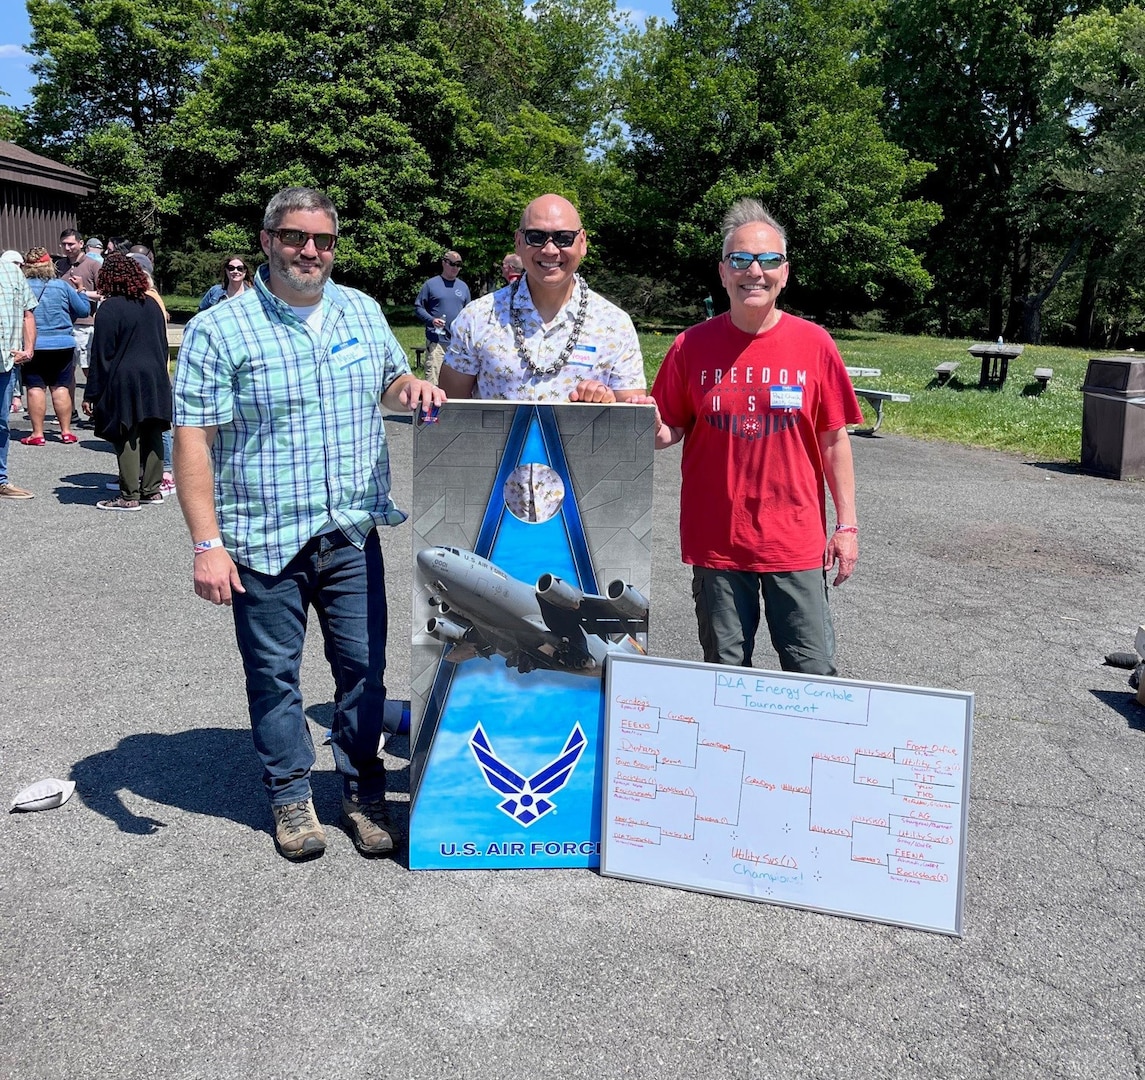 three gentlemen stand together with a cornhole board